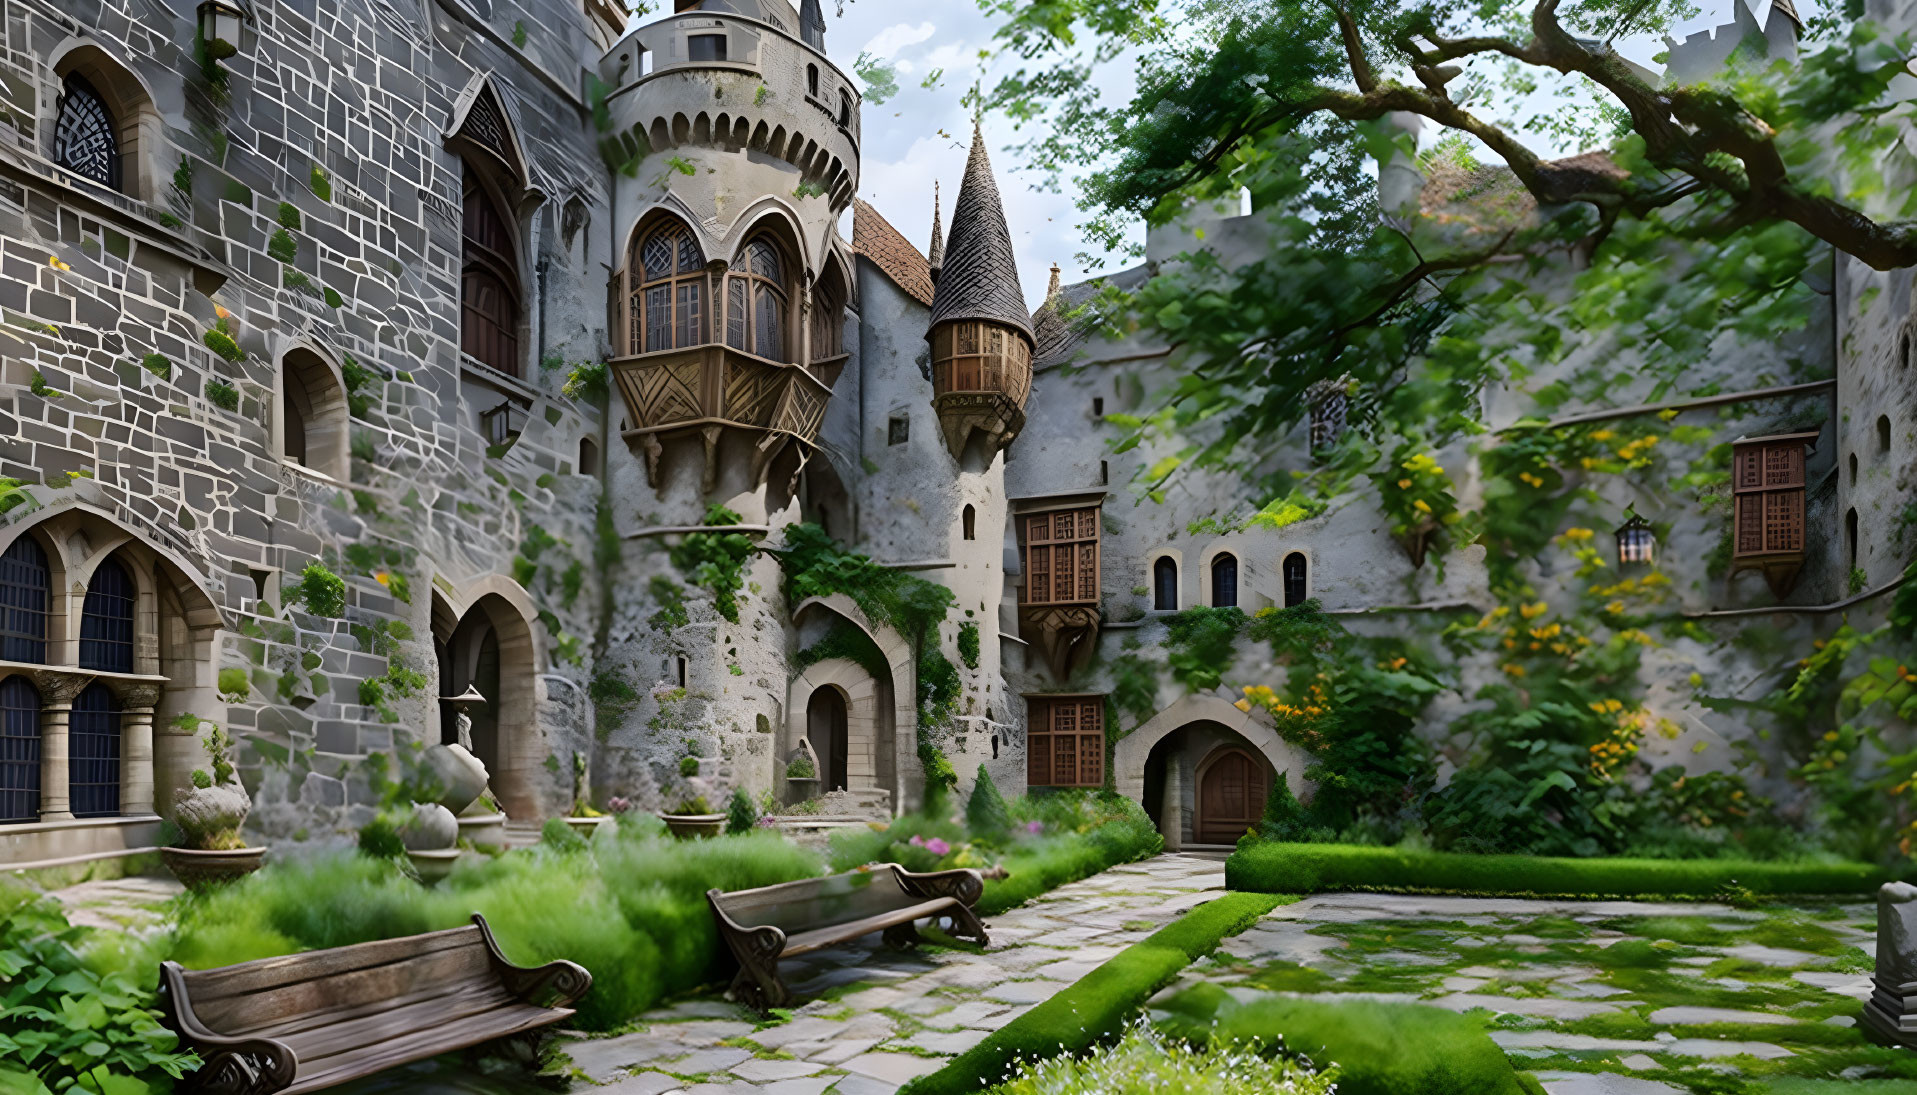 Beautiful castle and court